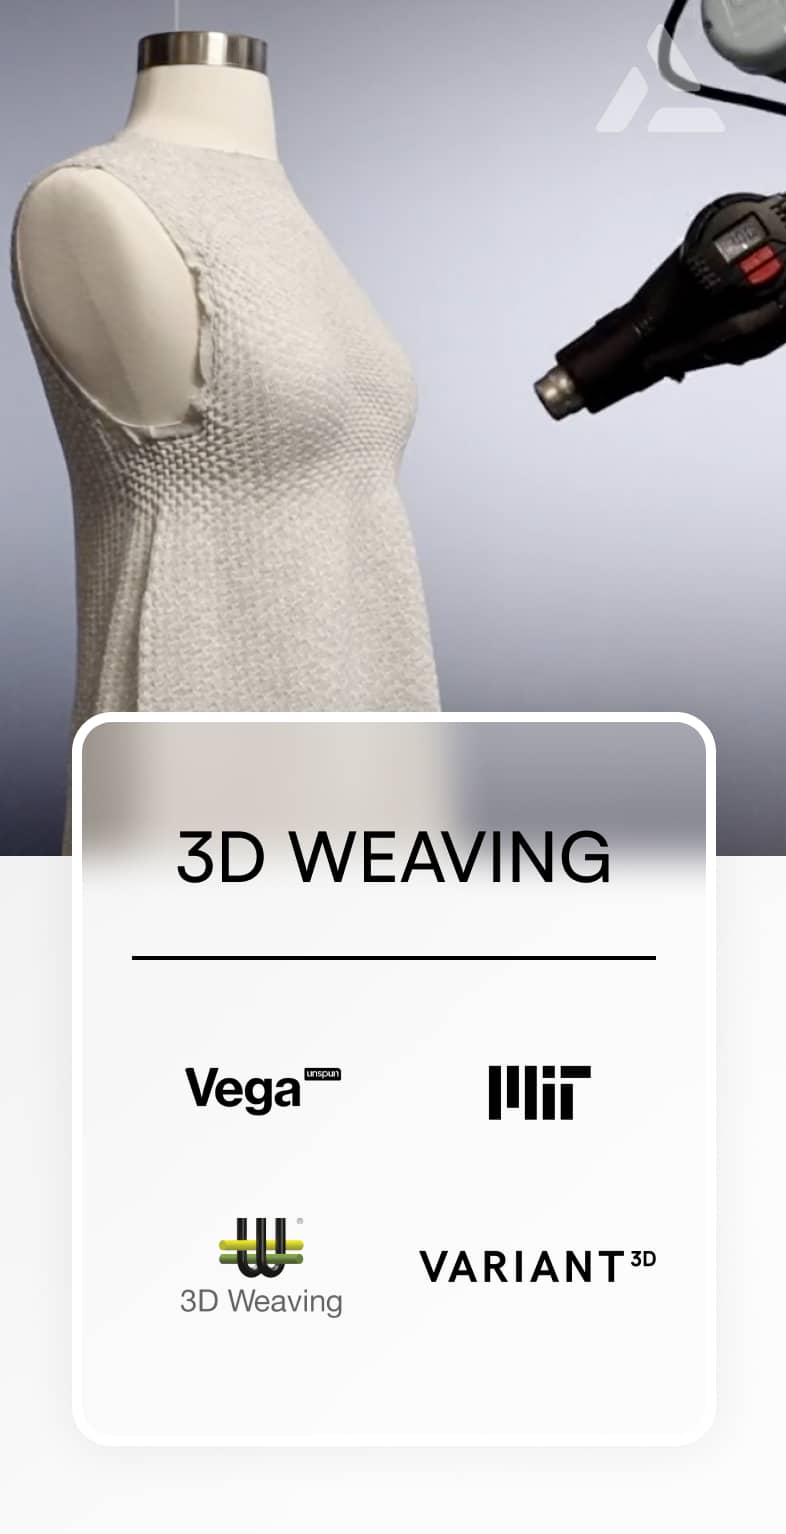 A mannequin displaying a white textured garment, with labels reading "3D weaving" and company logos, suitable for the tech landscape, while a handheld device is pointed at it.